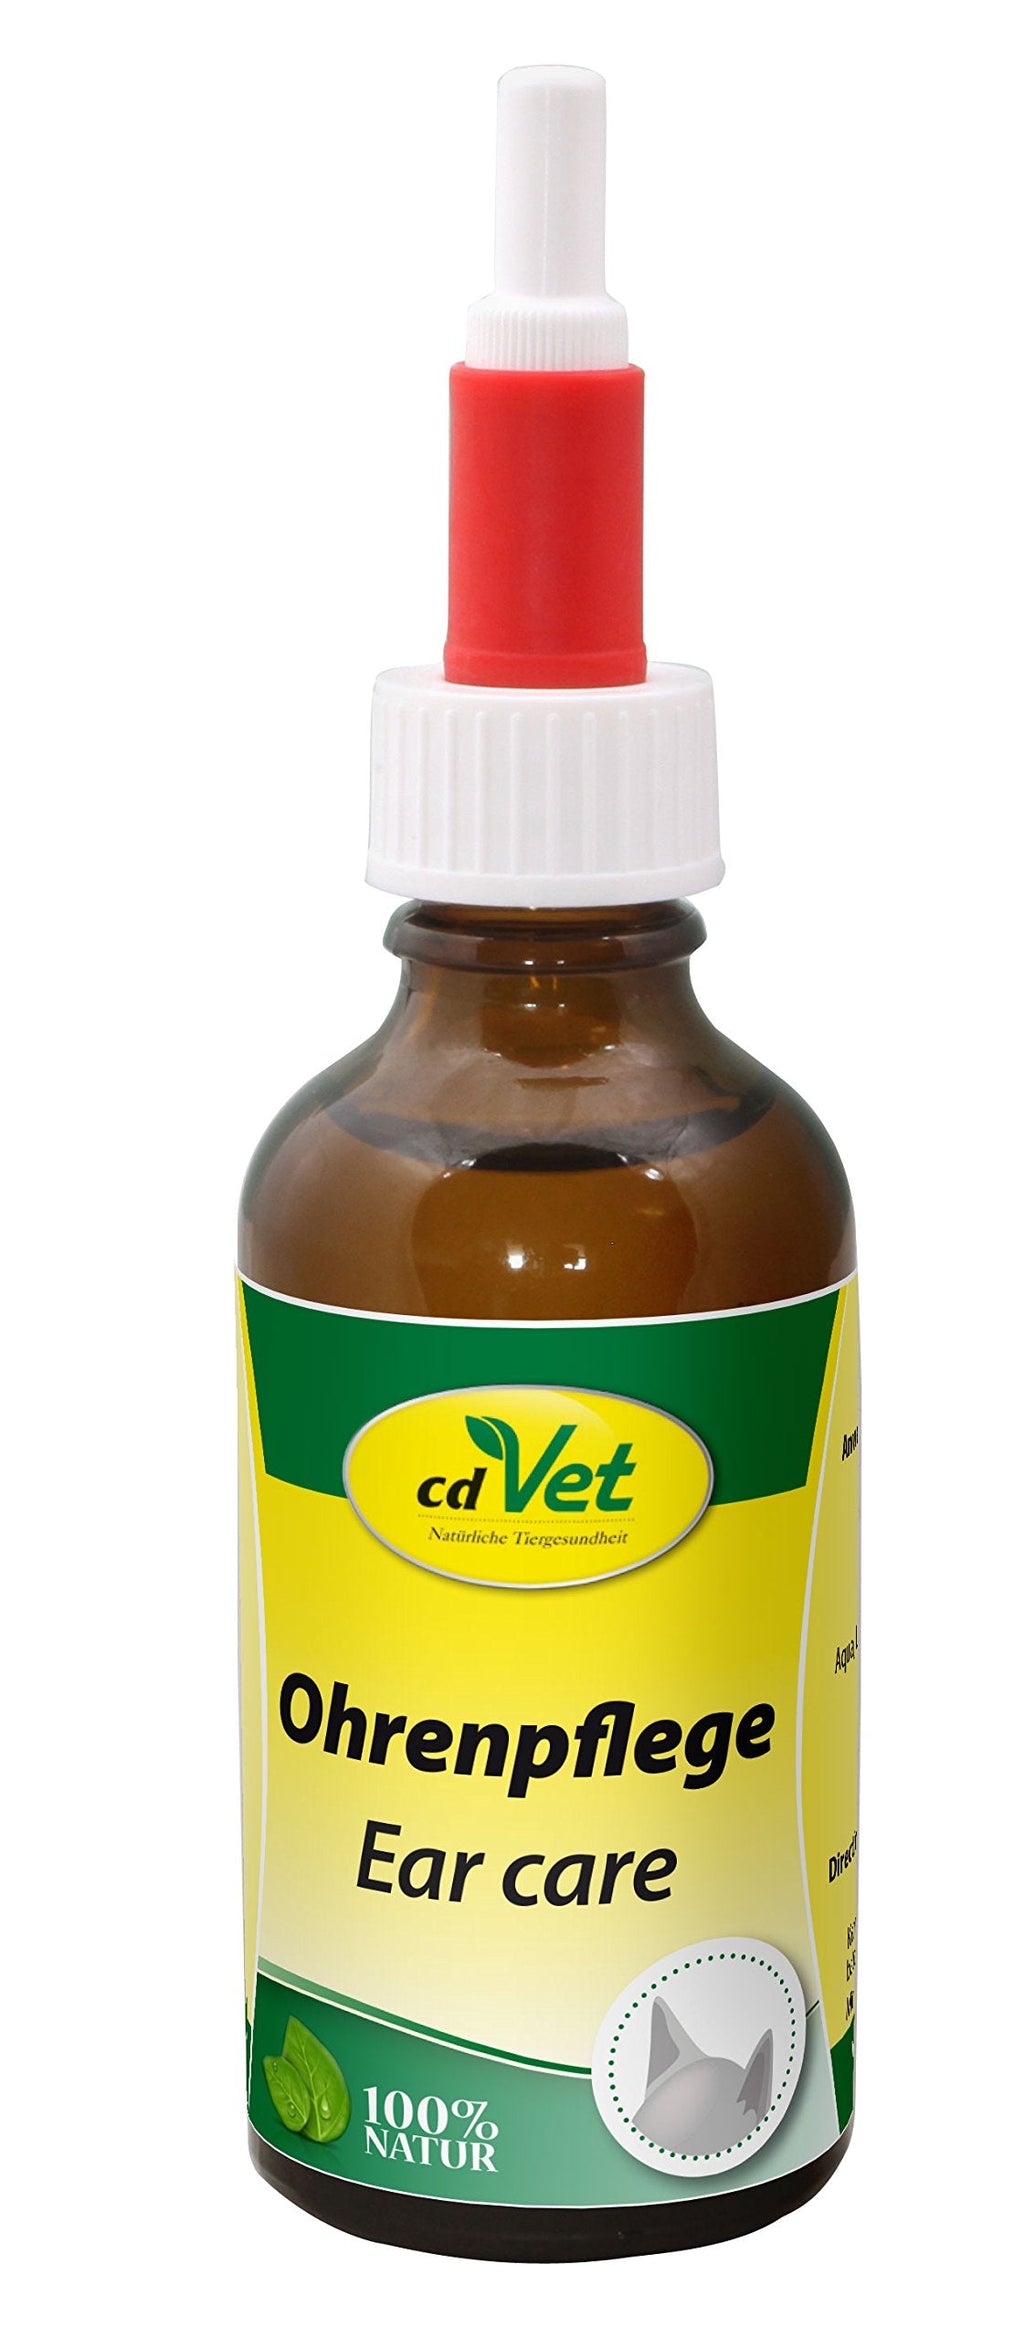 cdVet natural products ear care 50 ml - dog - care product - gentle cleaning + care of the ears + ear canal + auricle - mite infestation - independent distribution - health - profound - - PawsPlanet Australia